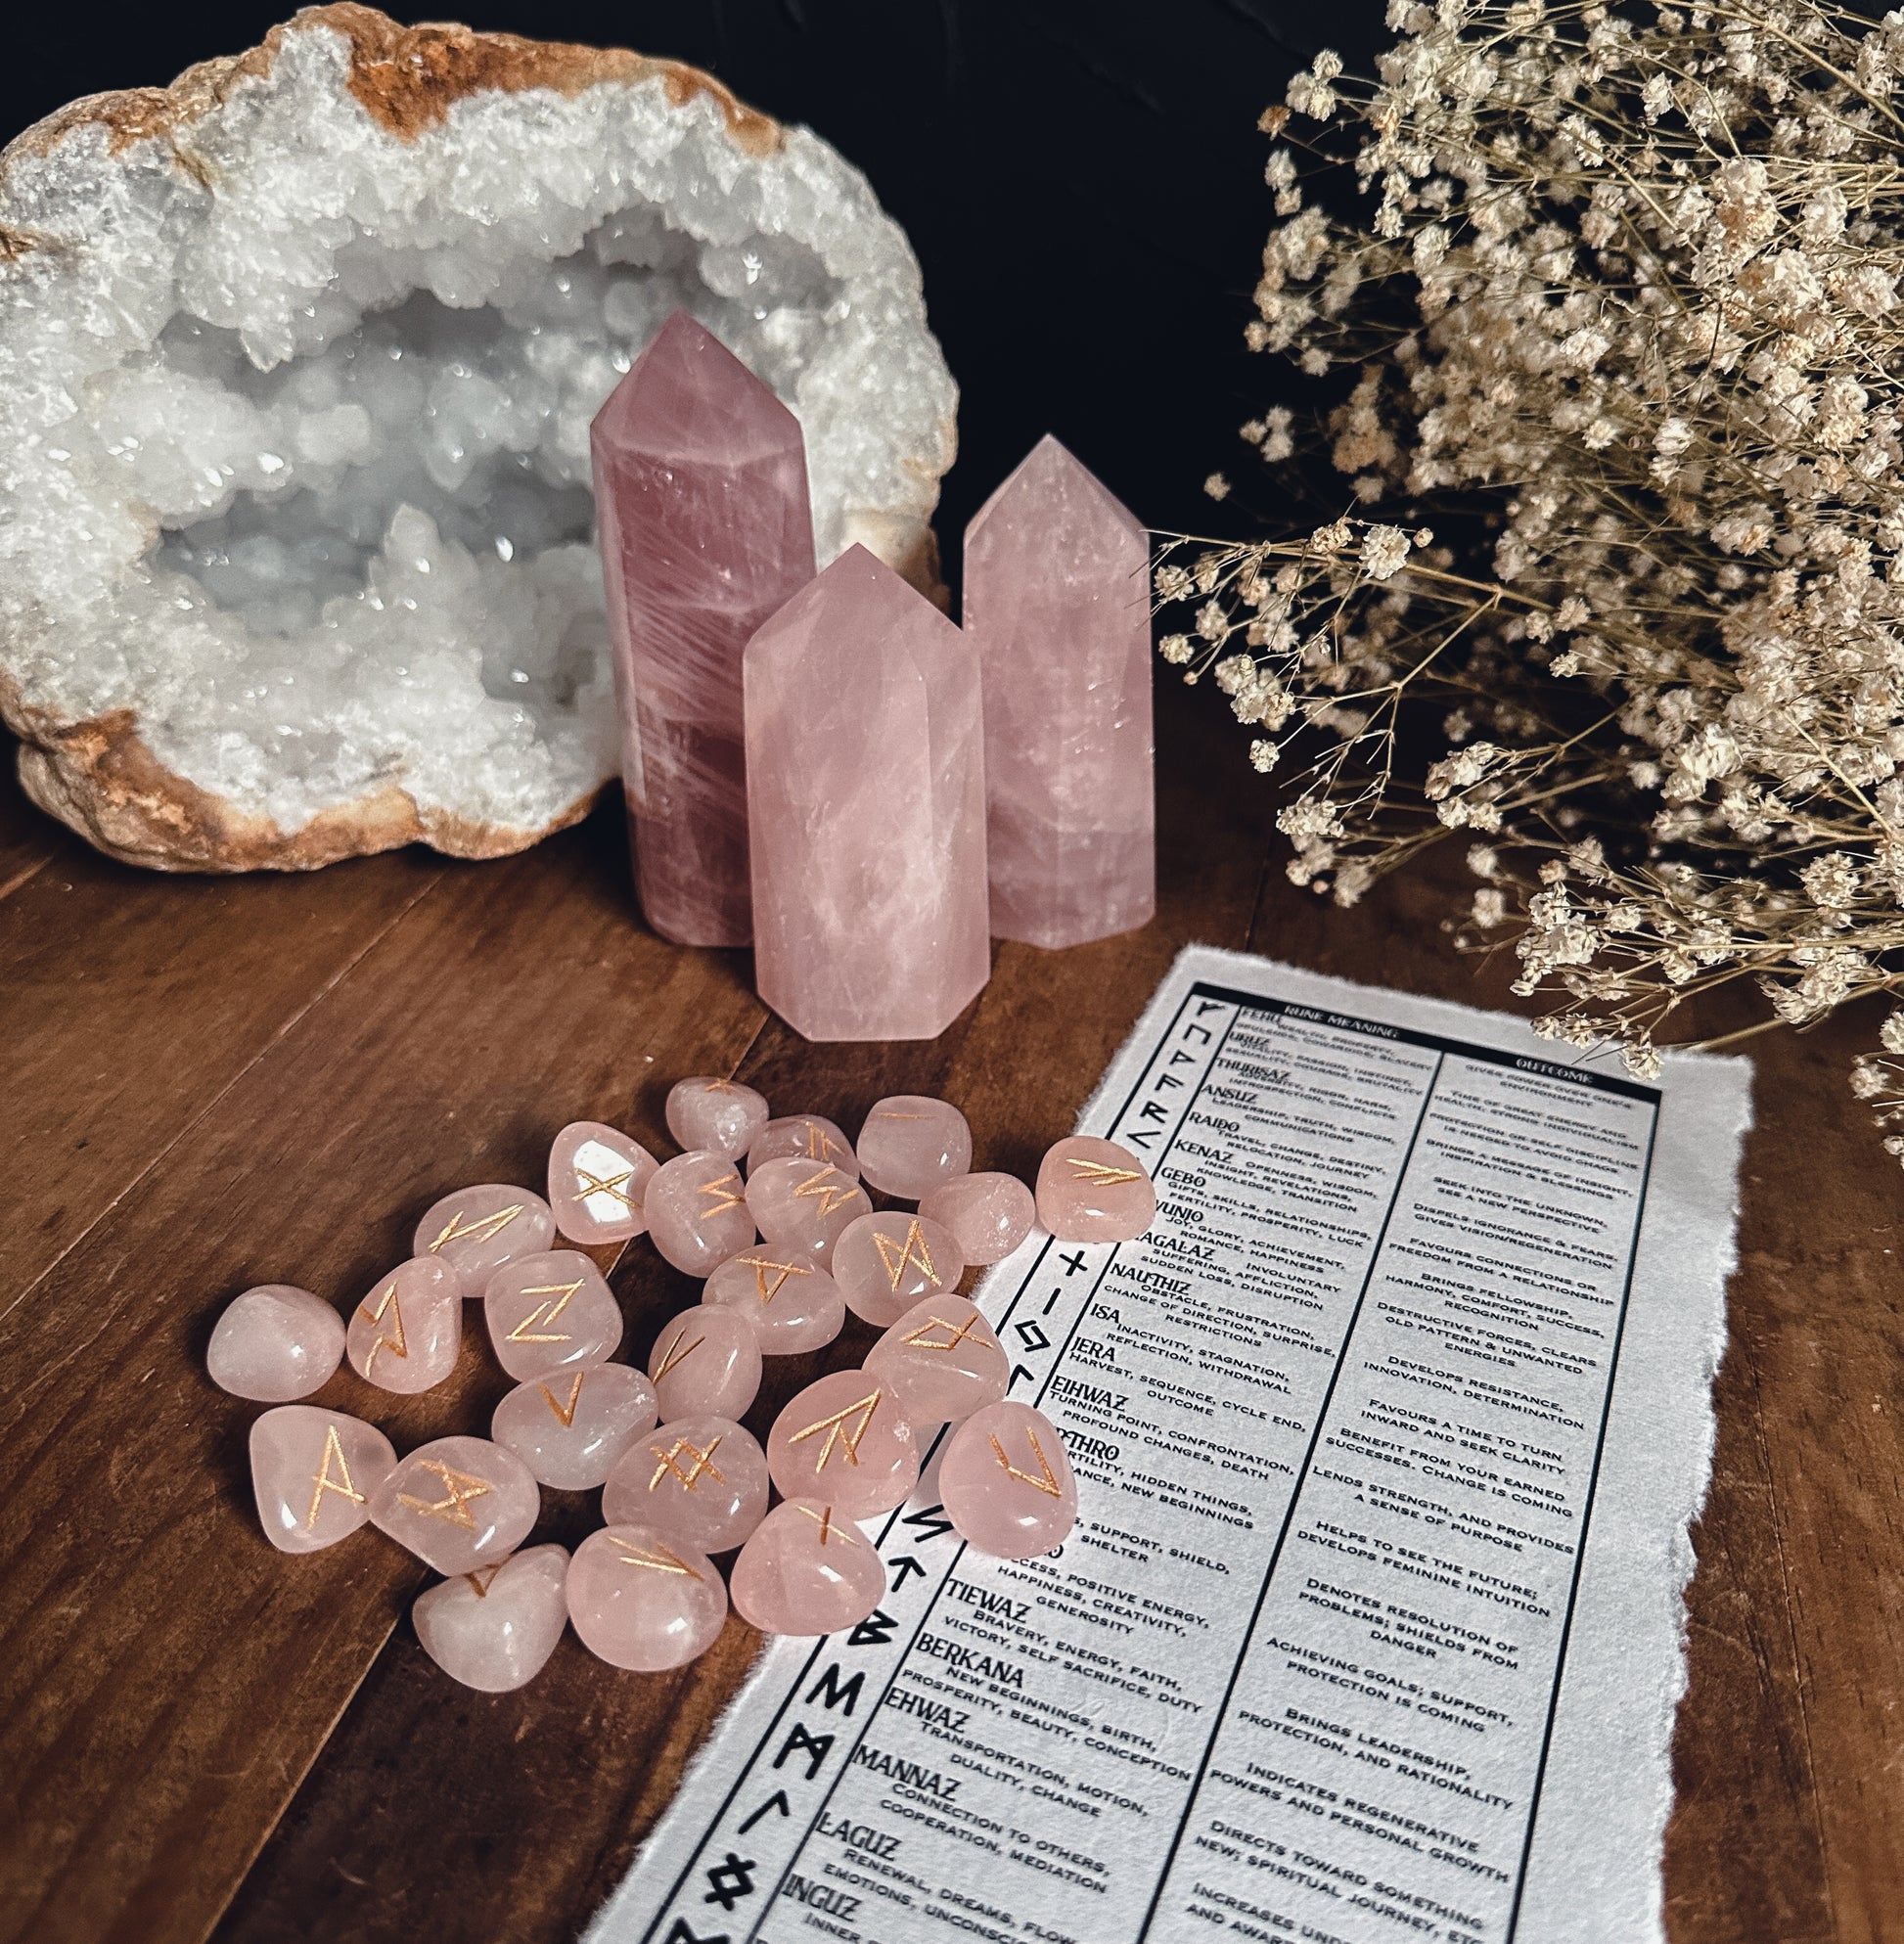 High-quality image featuring various metaphysical tools, including crystals, runes, and other spiritual items, perfect for enhancing meditation, divination, and energy work. 